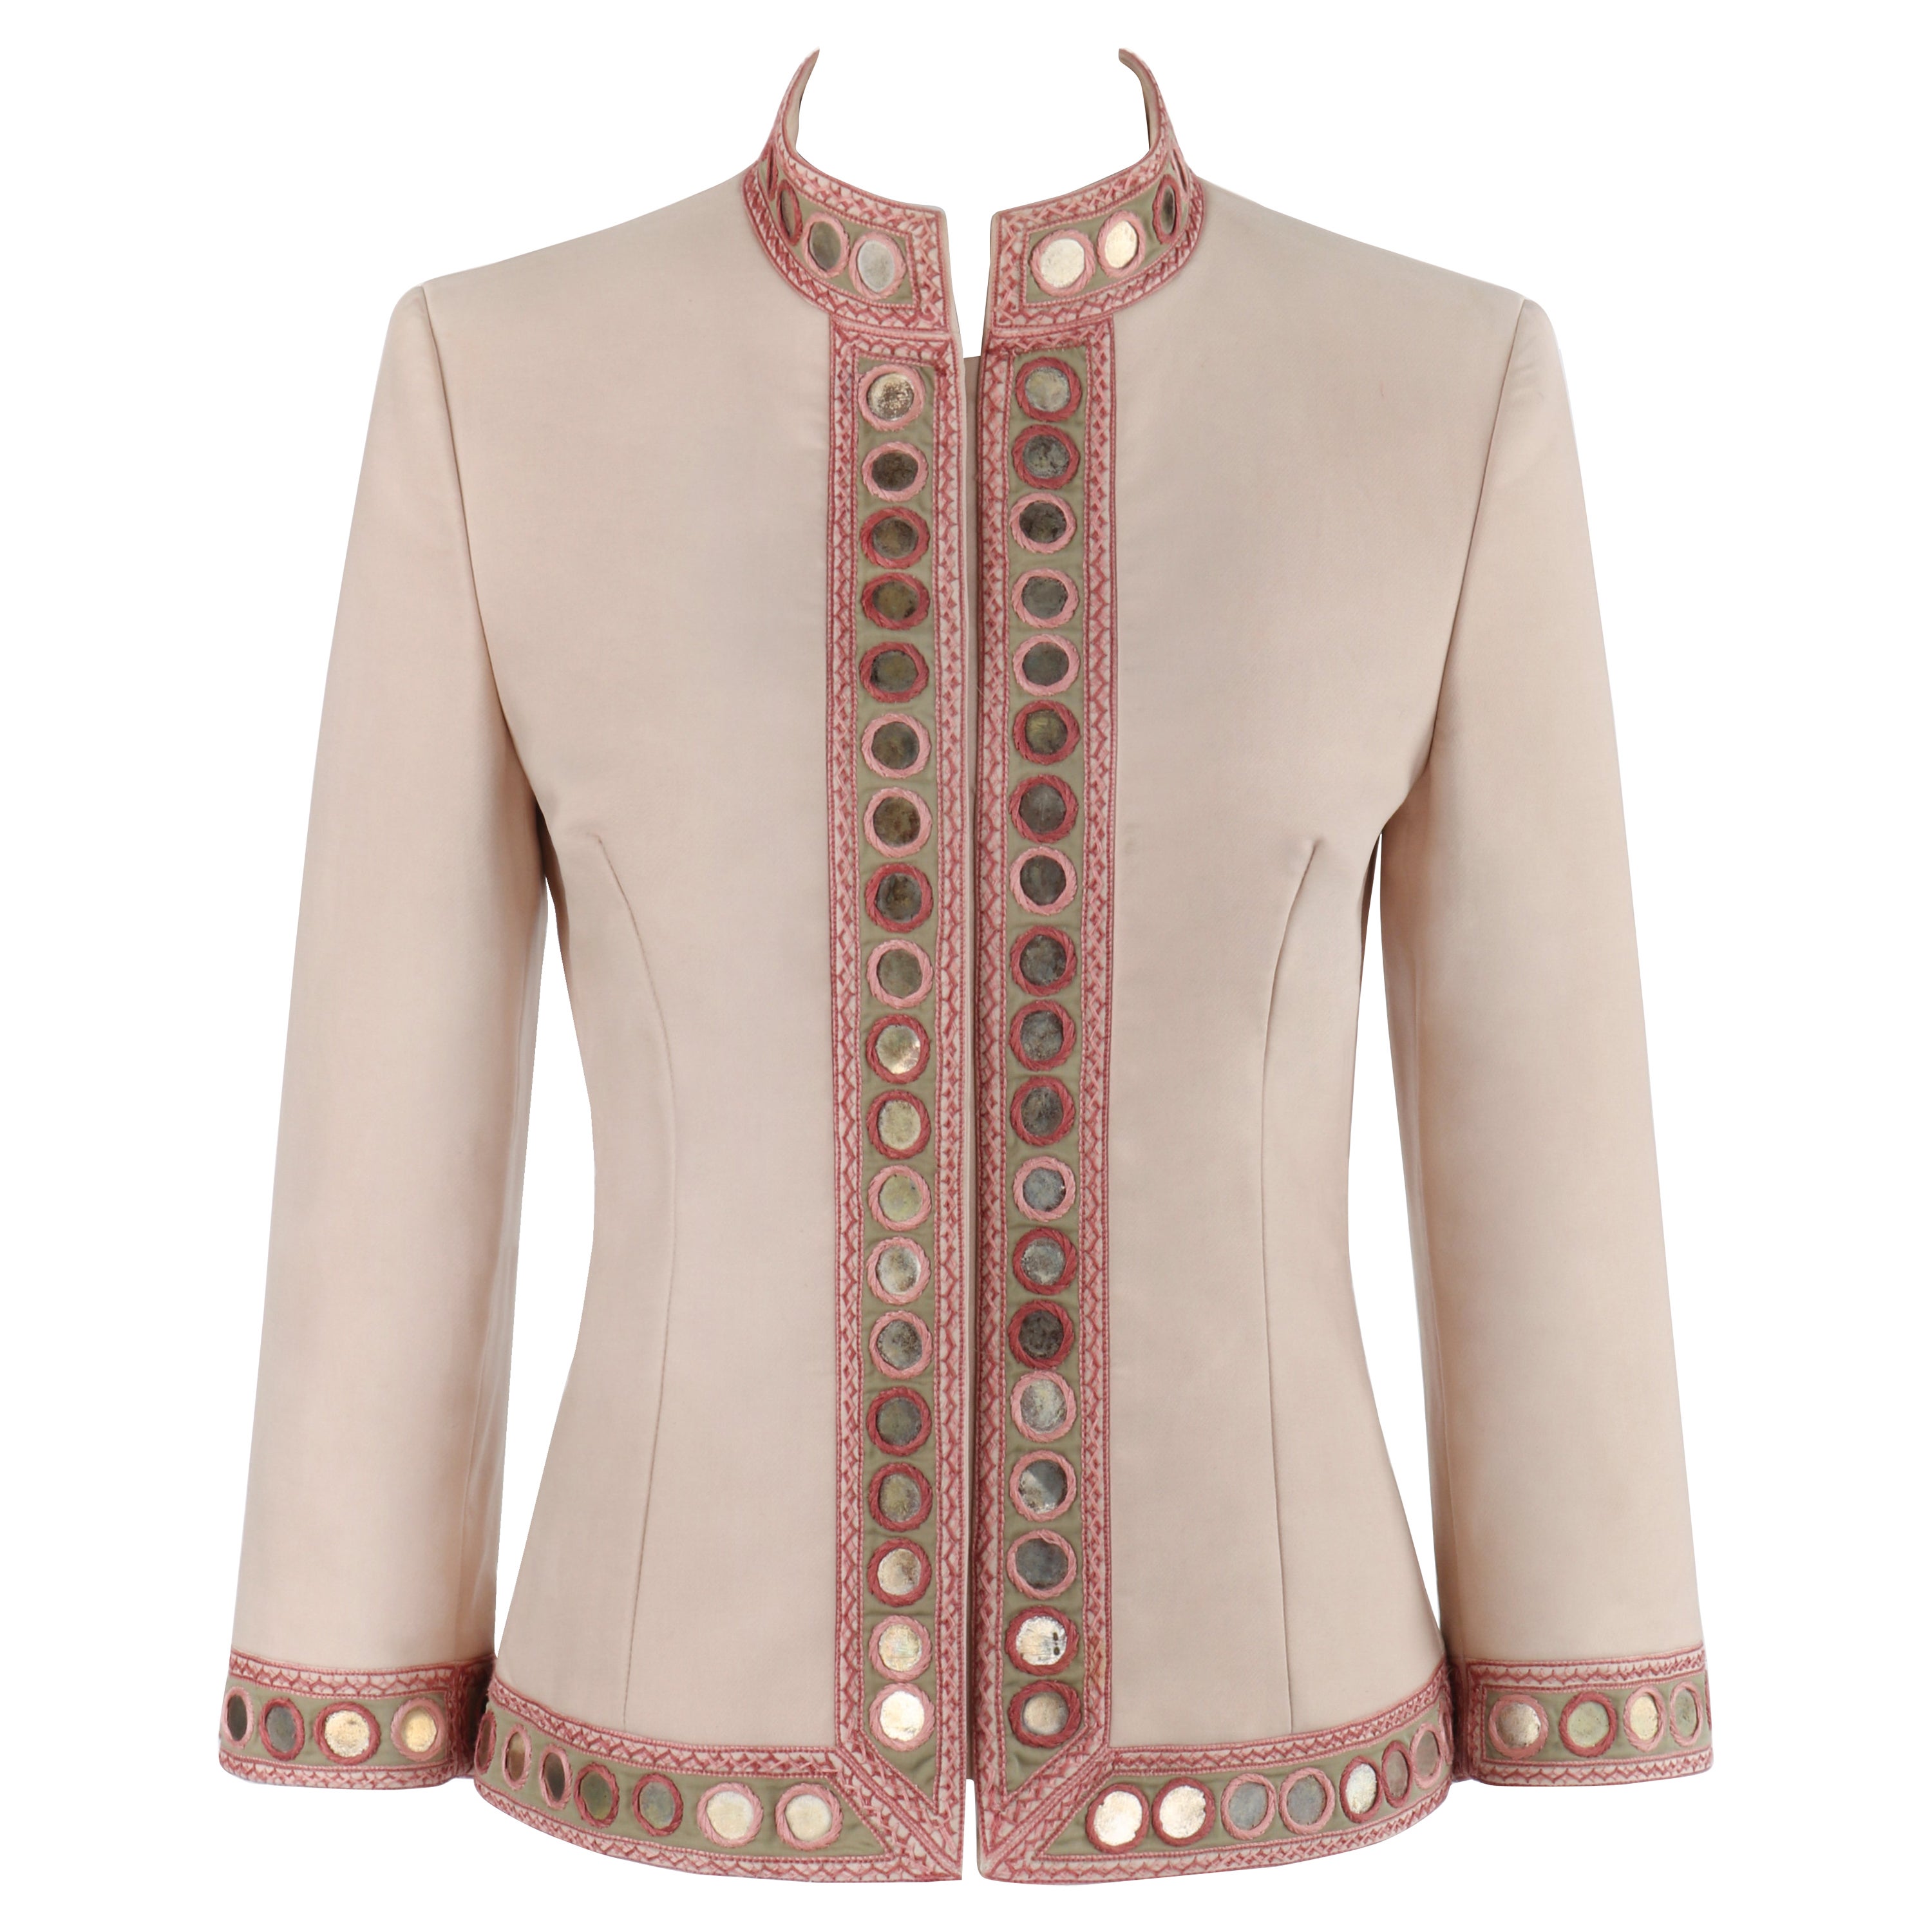 ALEXANDER McQUEEN S/S 2005 Beige Gold Coin Embroidered Collared Button Up Jacket For Sale